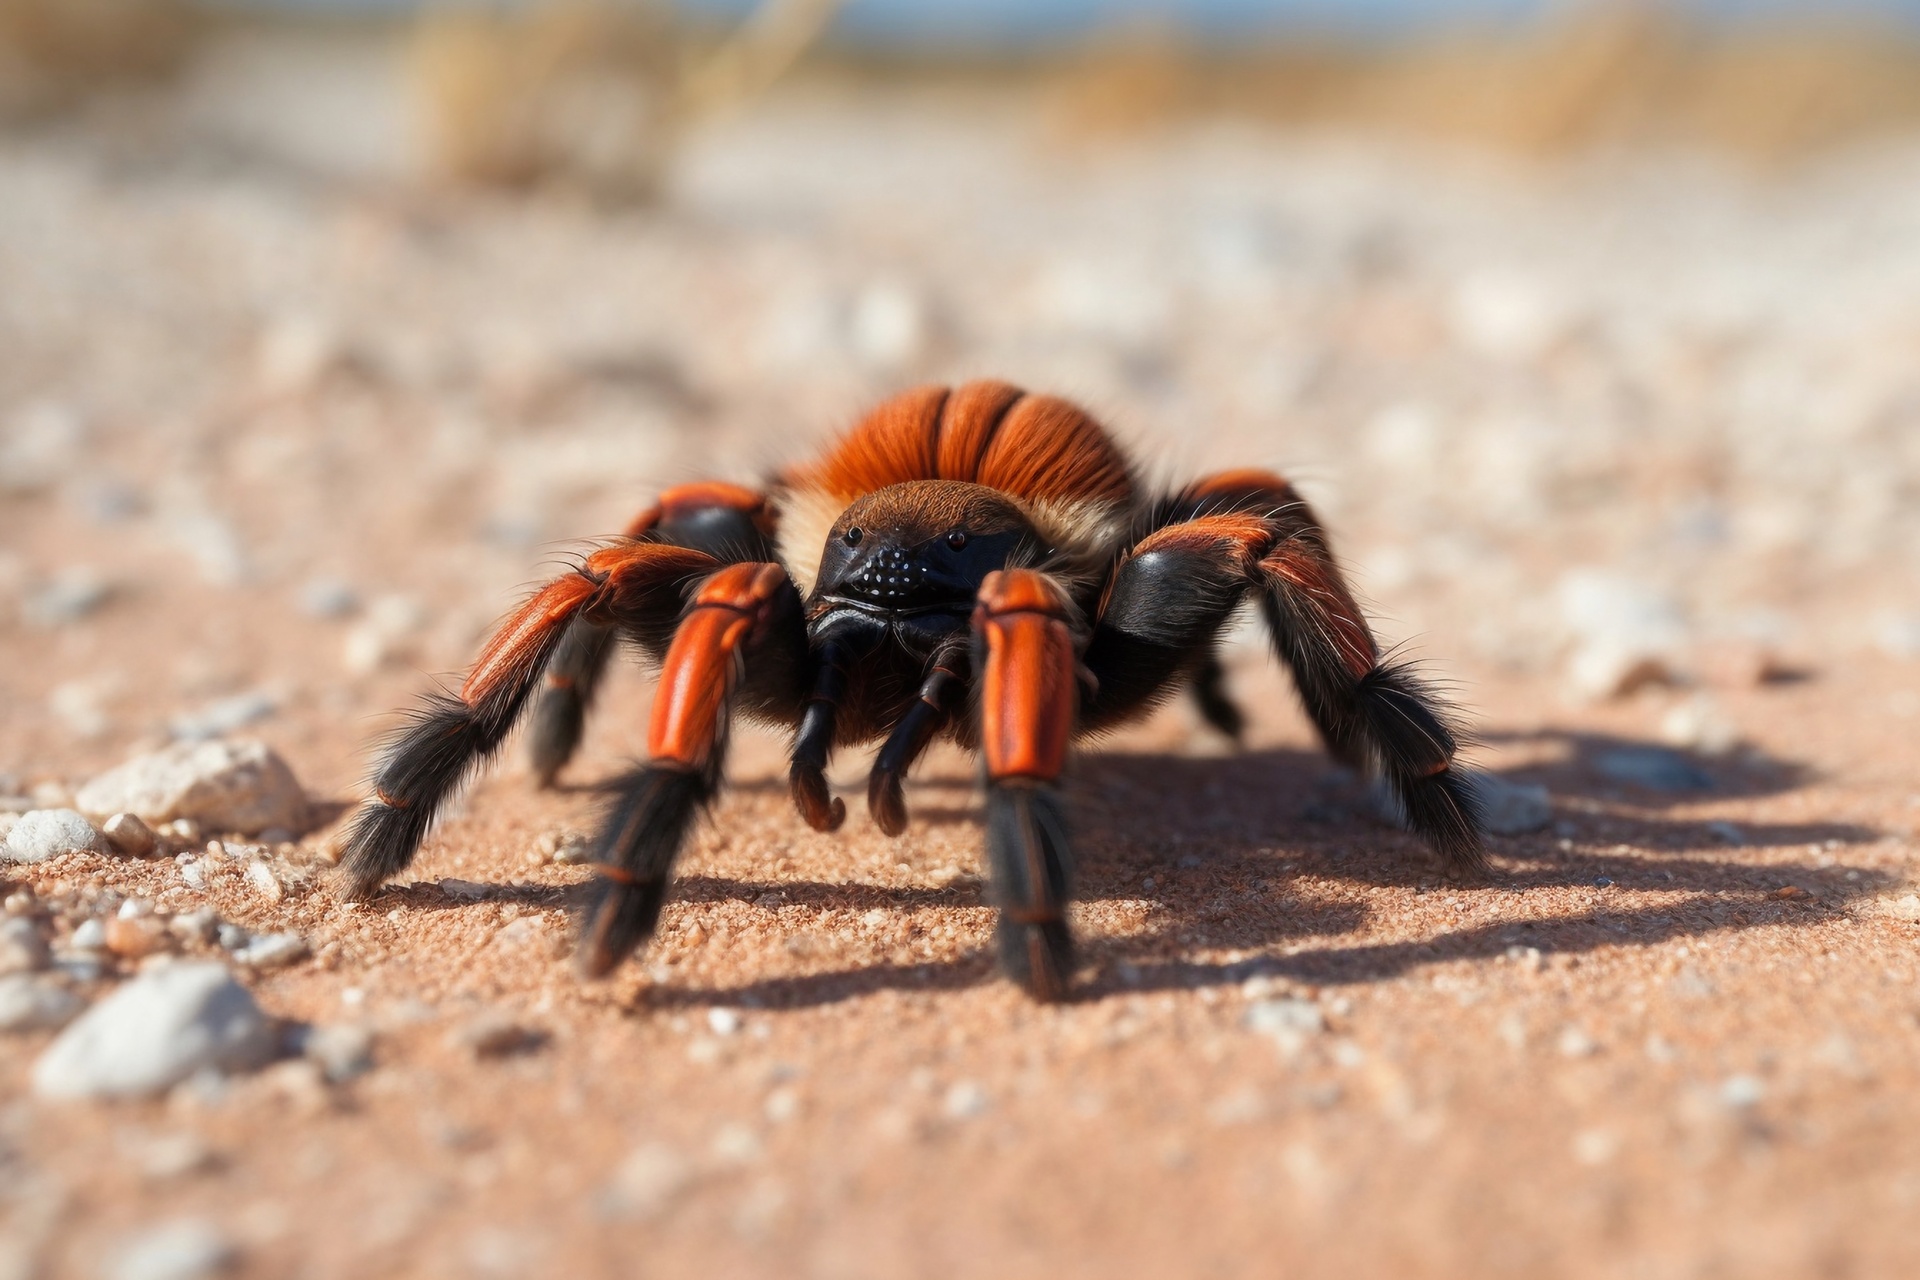 Getting Rid of Tarantulas without Harming Them